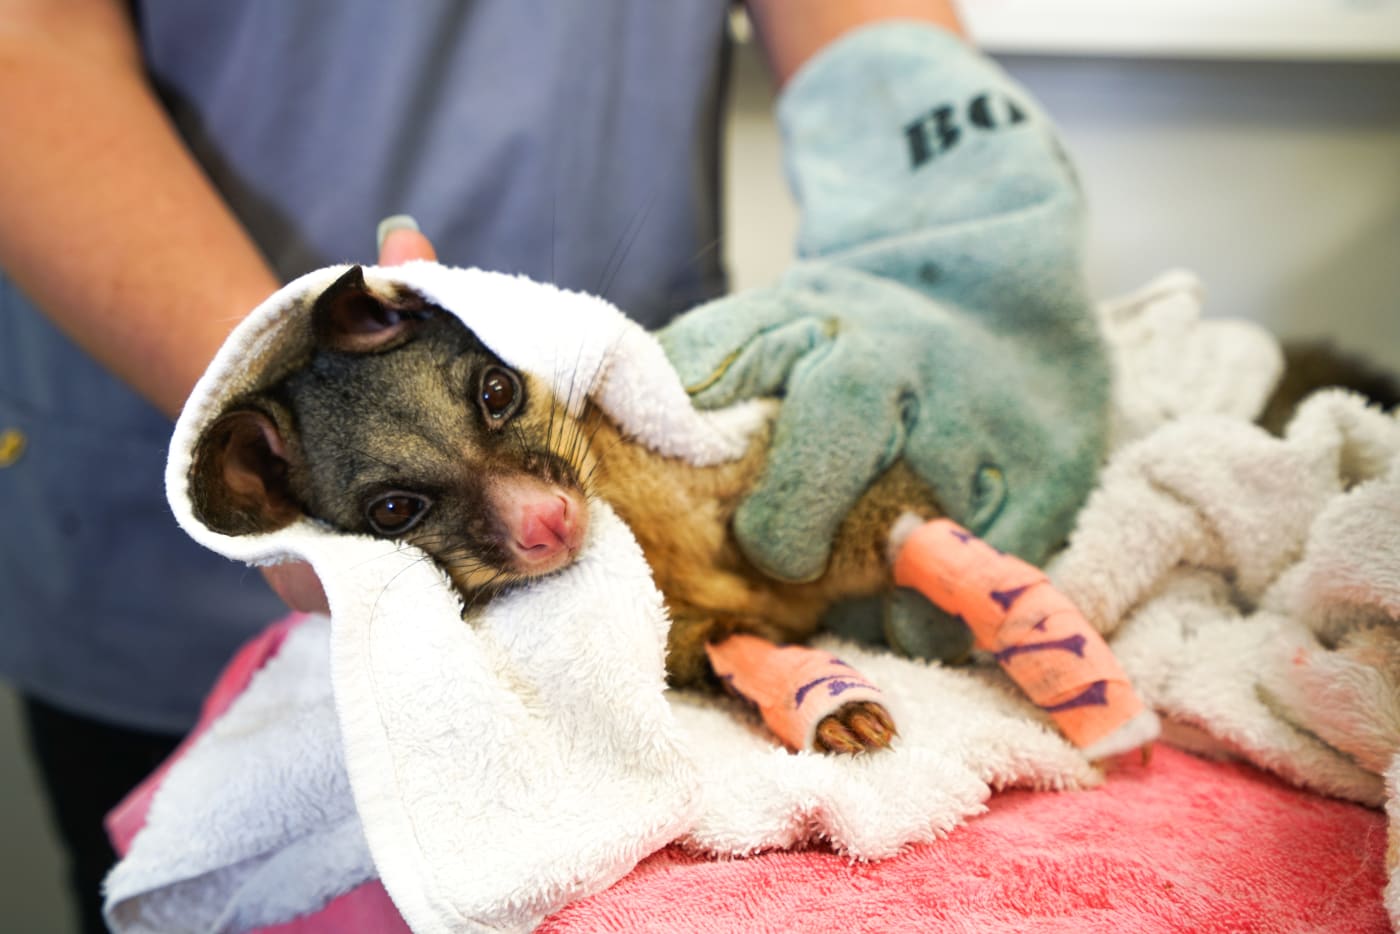 Veterinarians and nurses at Milton Village Vet treating Hissy the possum's burns. Hissy suffered third-degree burns to all four paws.